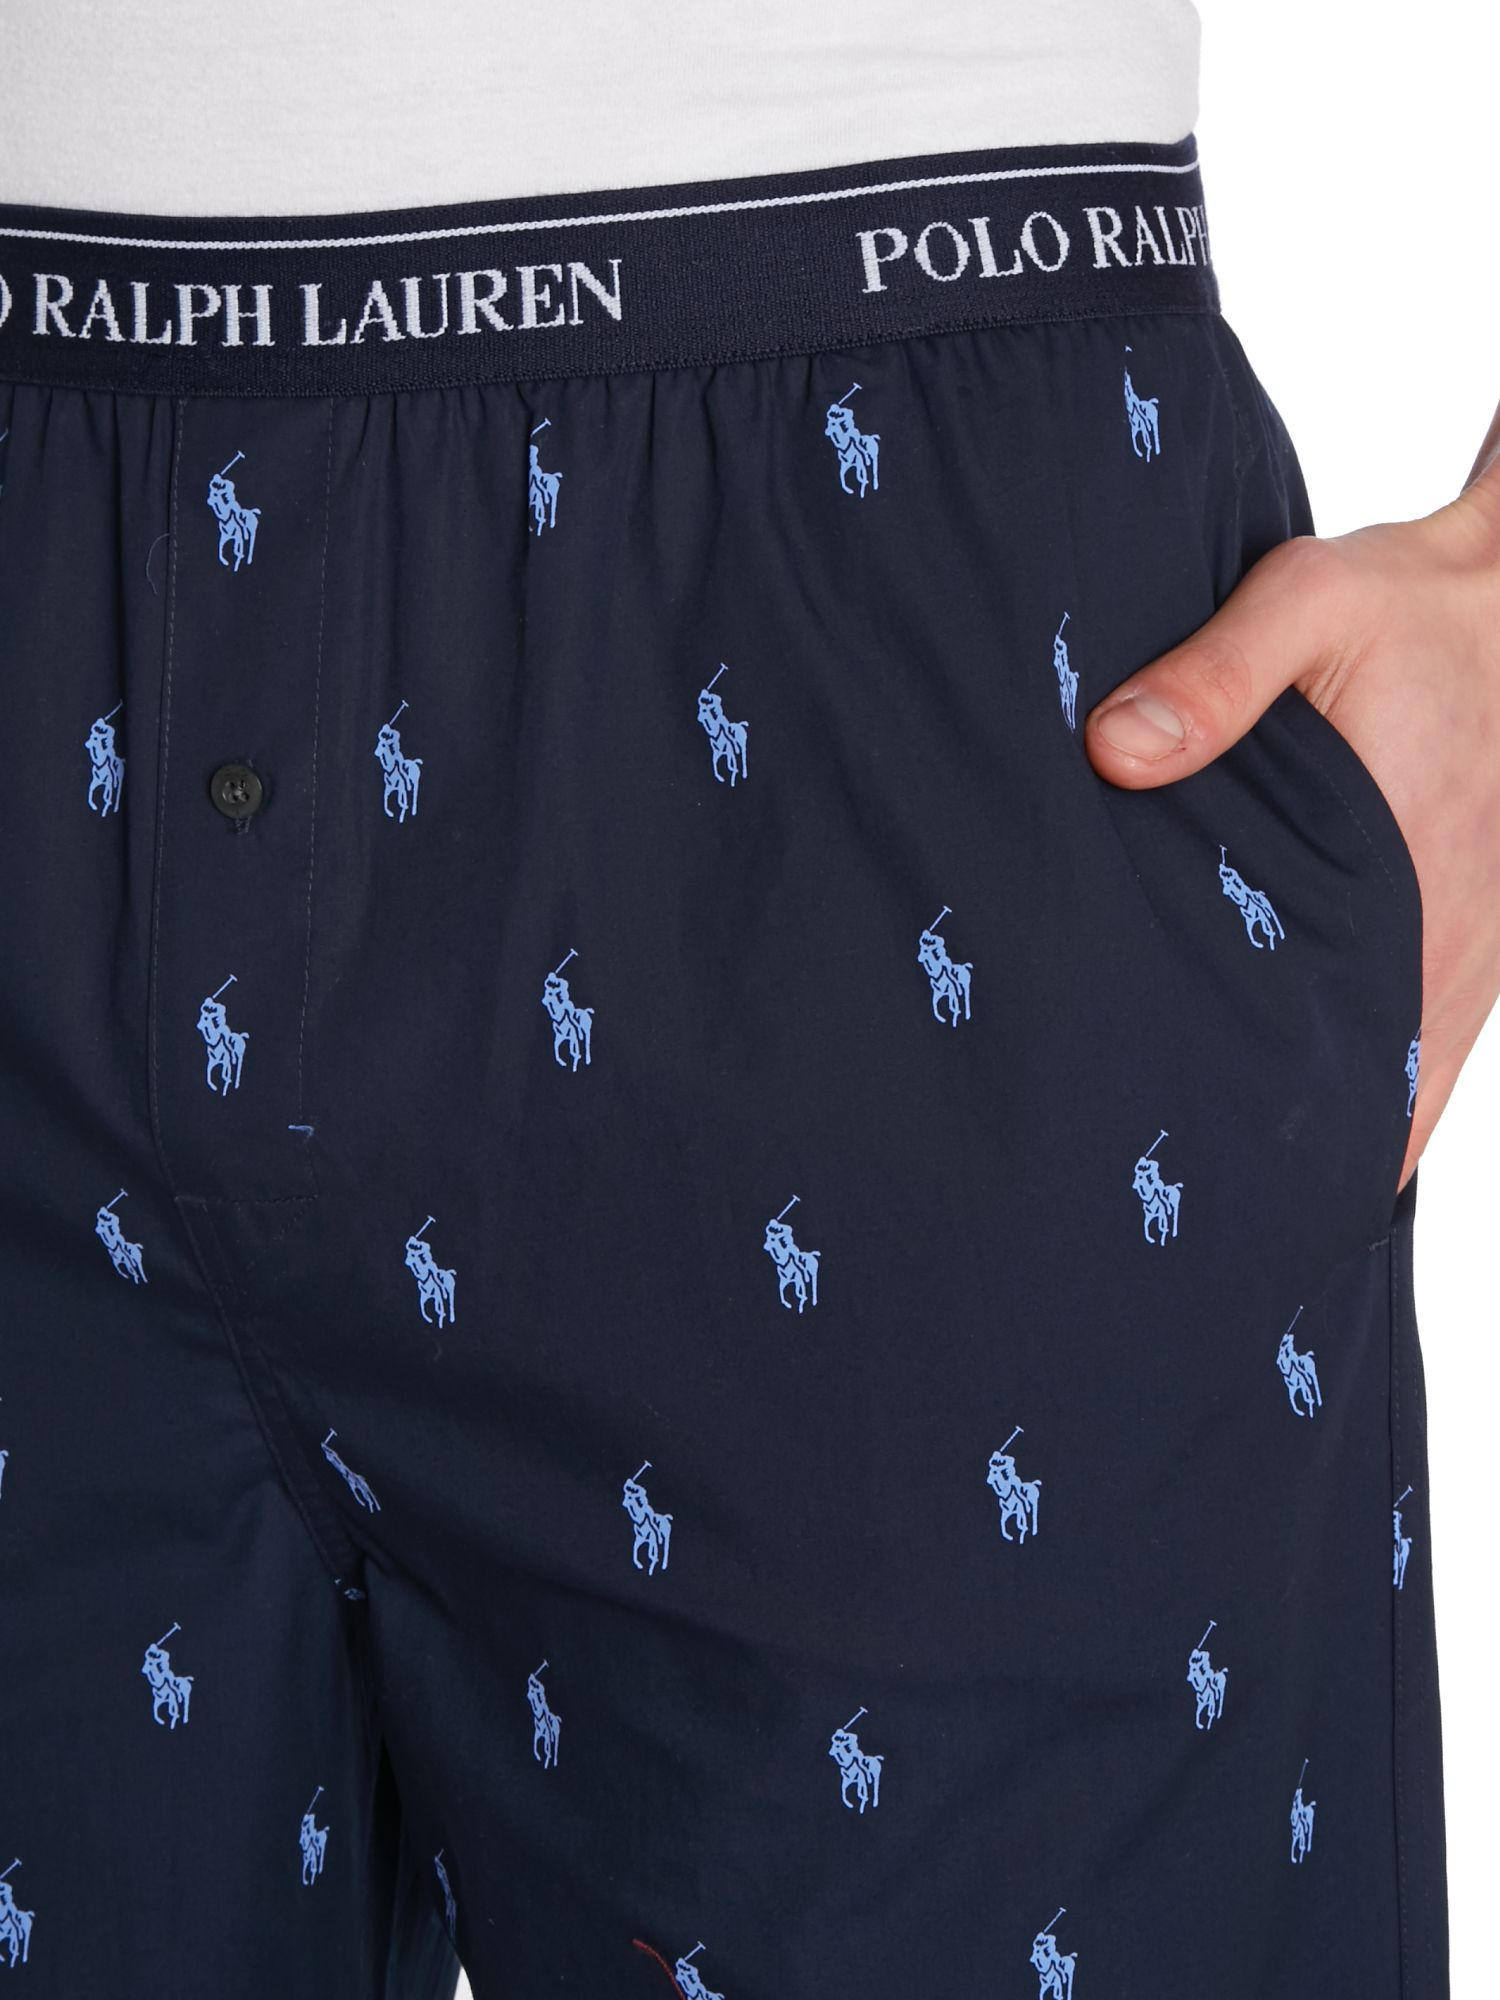 Polo ralph lauren Printed Cotton Pyjama Trousers in Blue for Men | Lyst